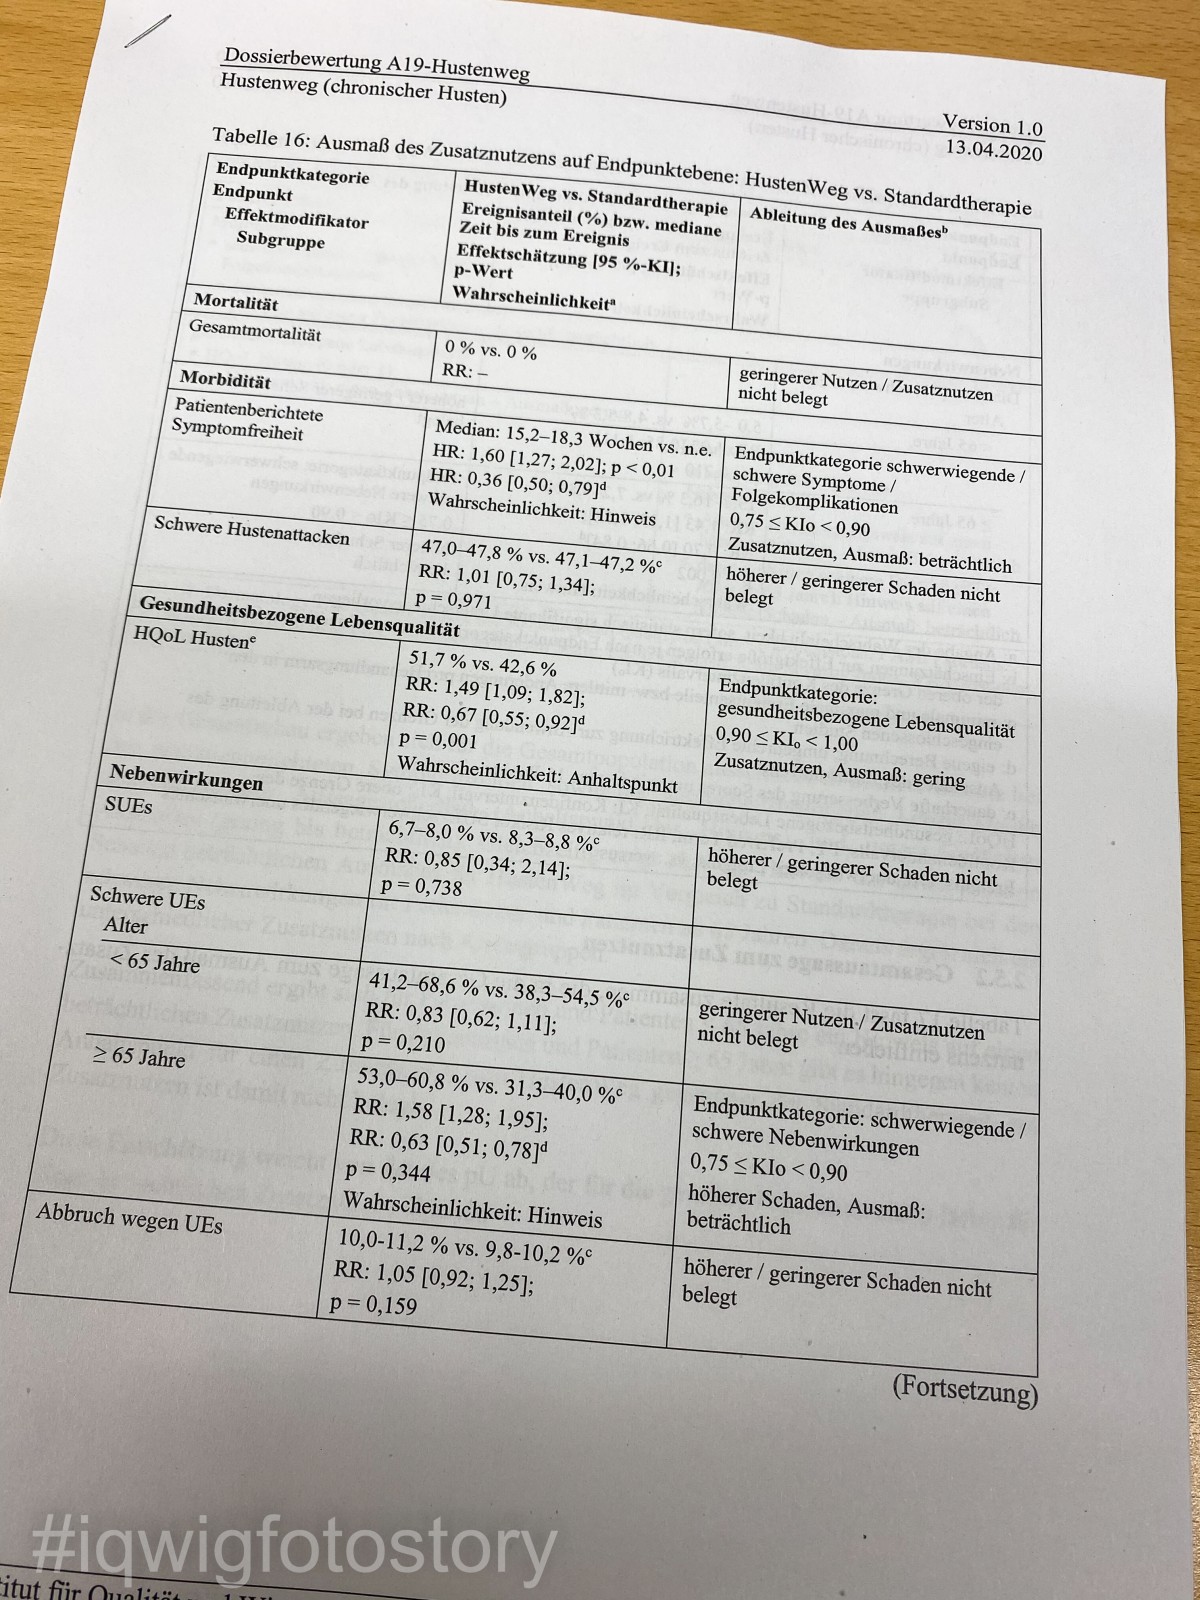 Printed full-page table on the extent of the added benefit of the cough medicine “HustenWeg”. The lower part of the table shows that older people have more severe side effects than younger people do.